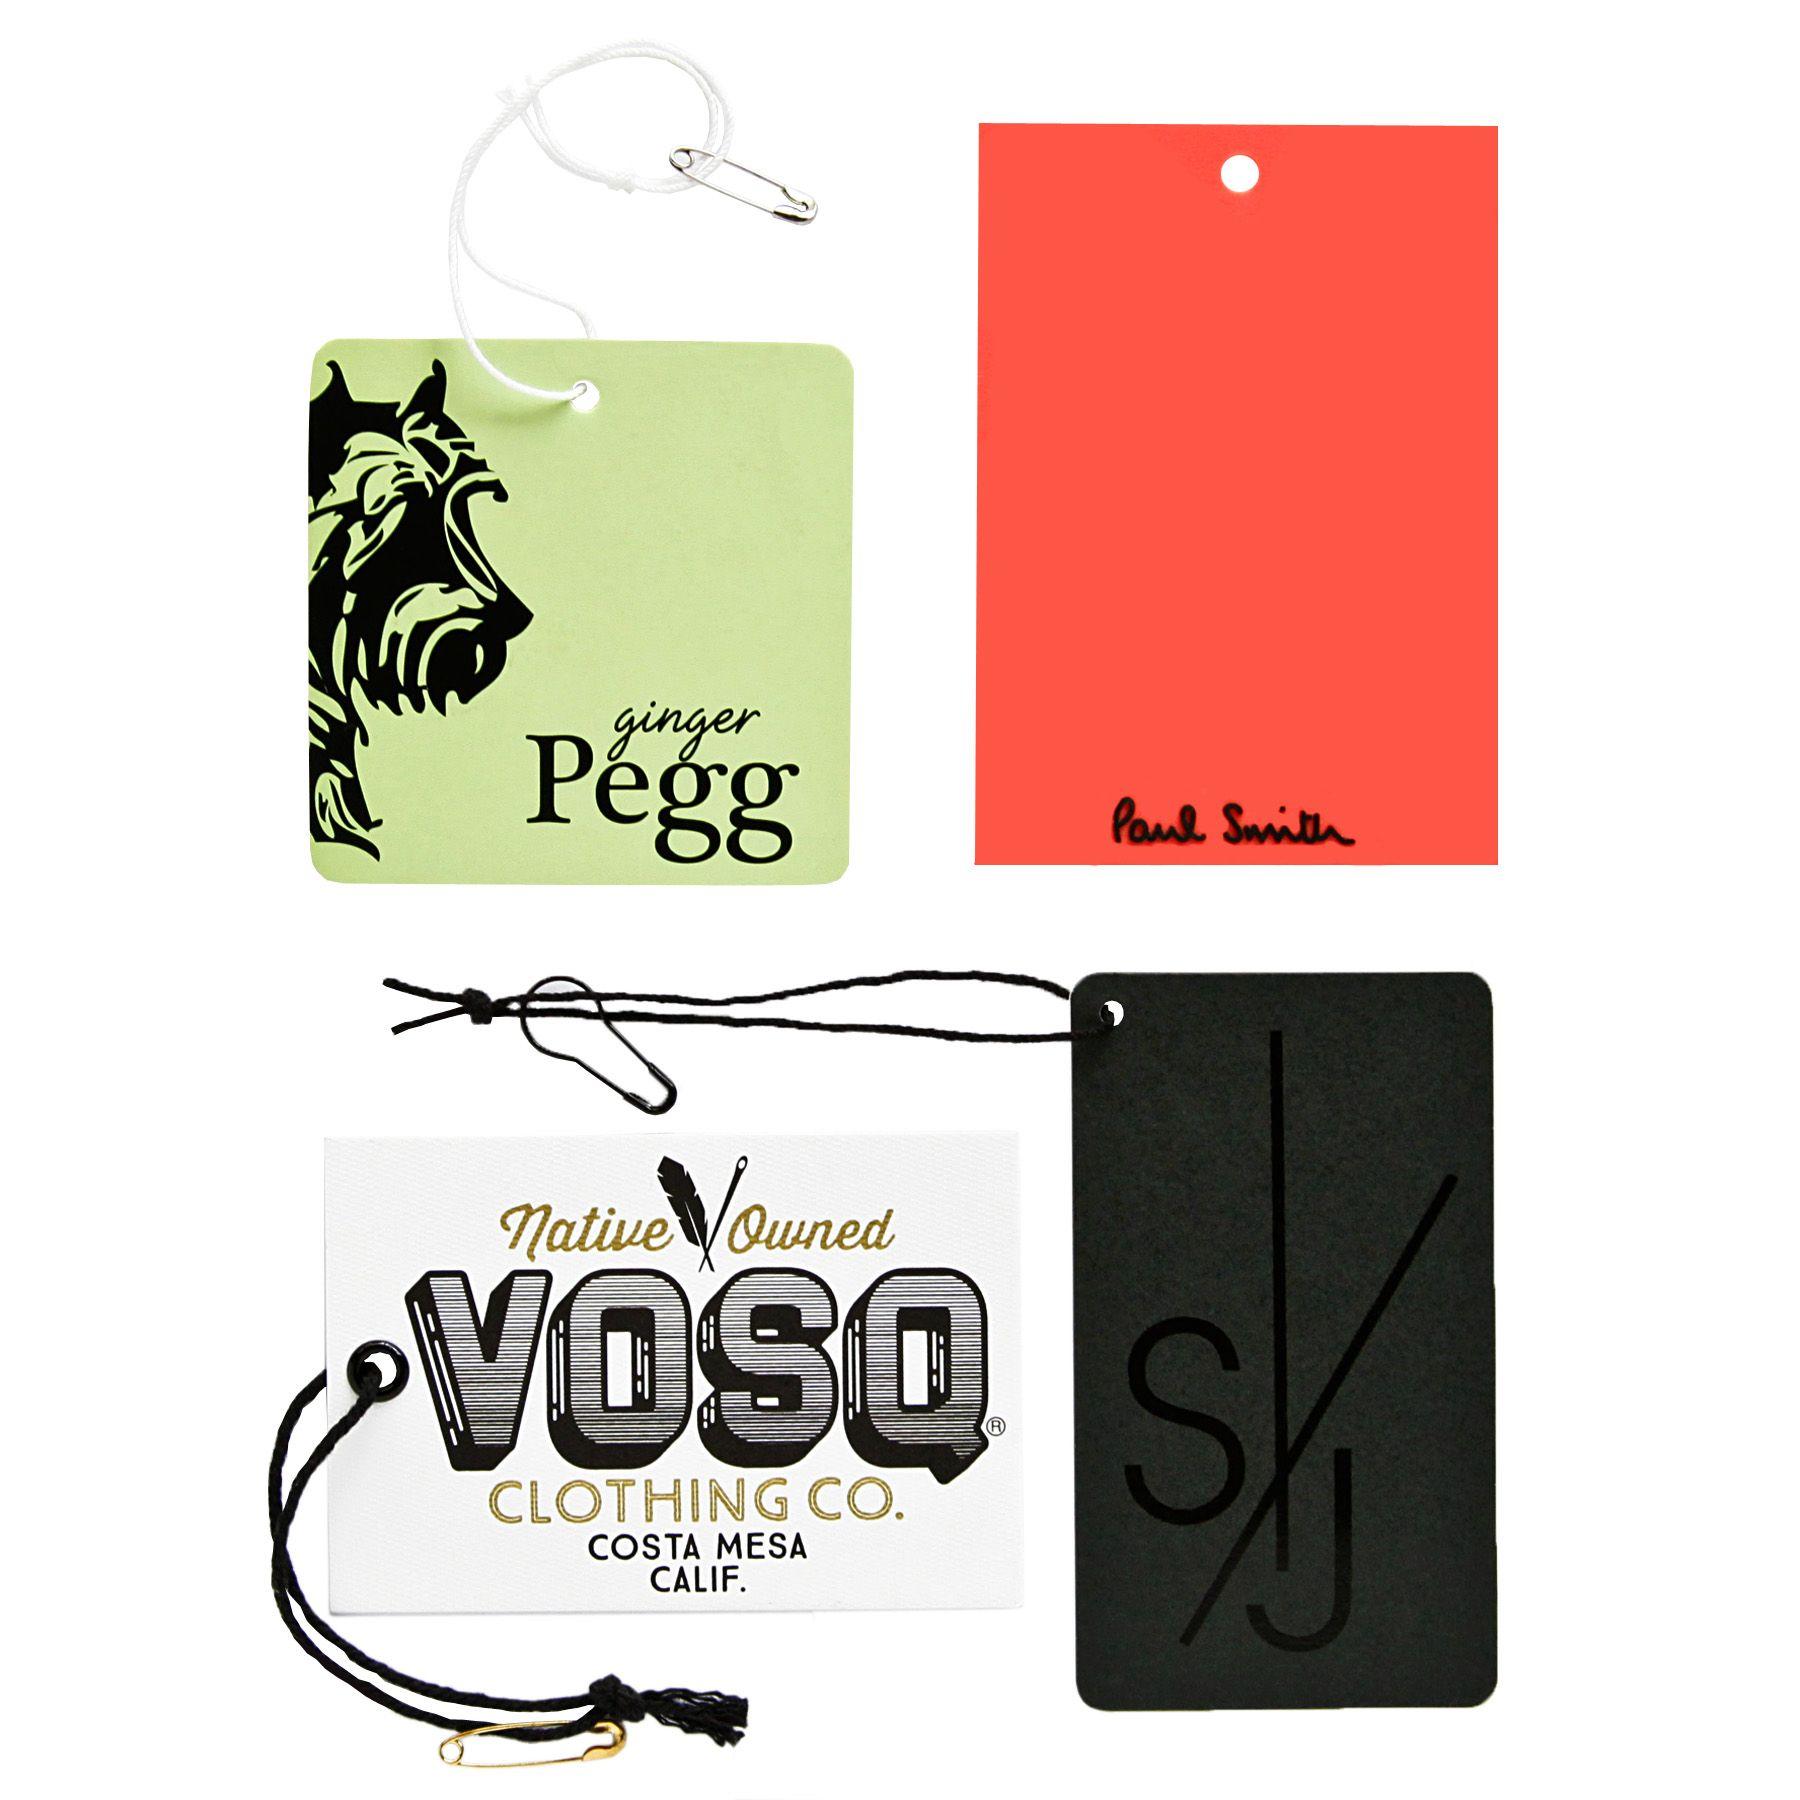 Merchandise Tags with Logo - Clothing Hang Tags Custom Made my CBF Labels